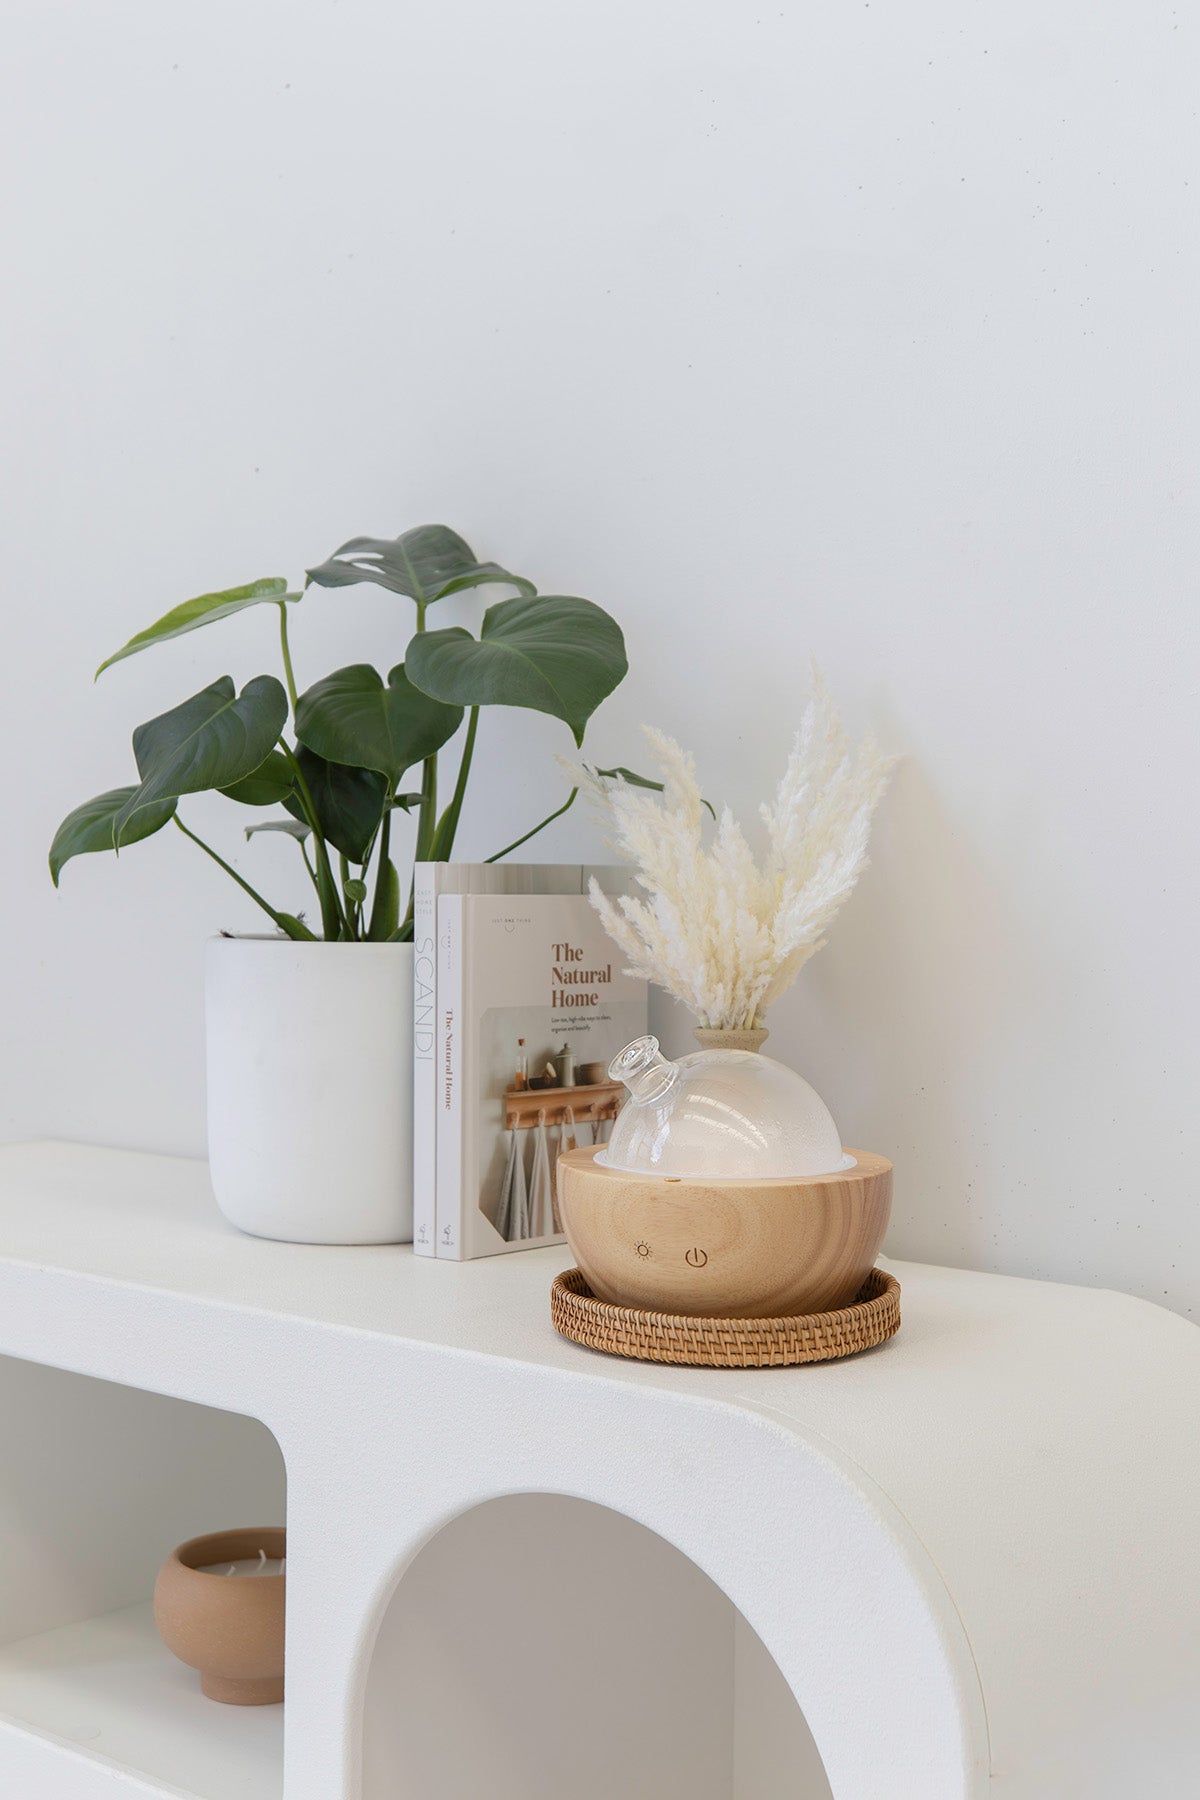 Beautiful wood look essential oil diffuser for gifting